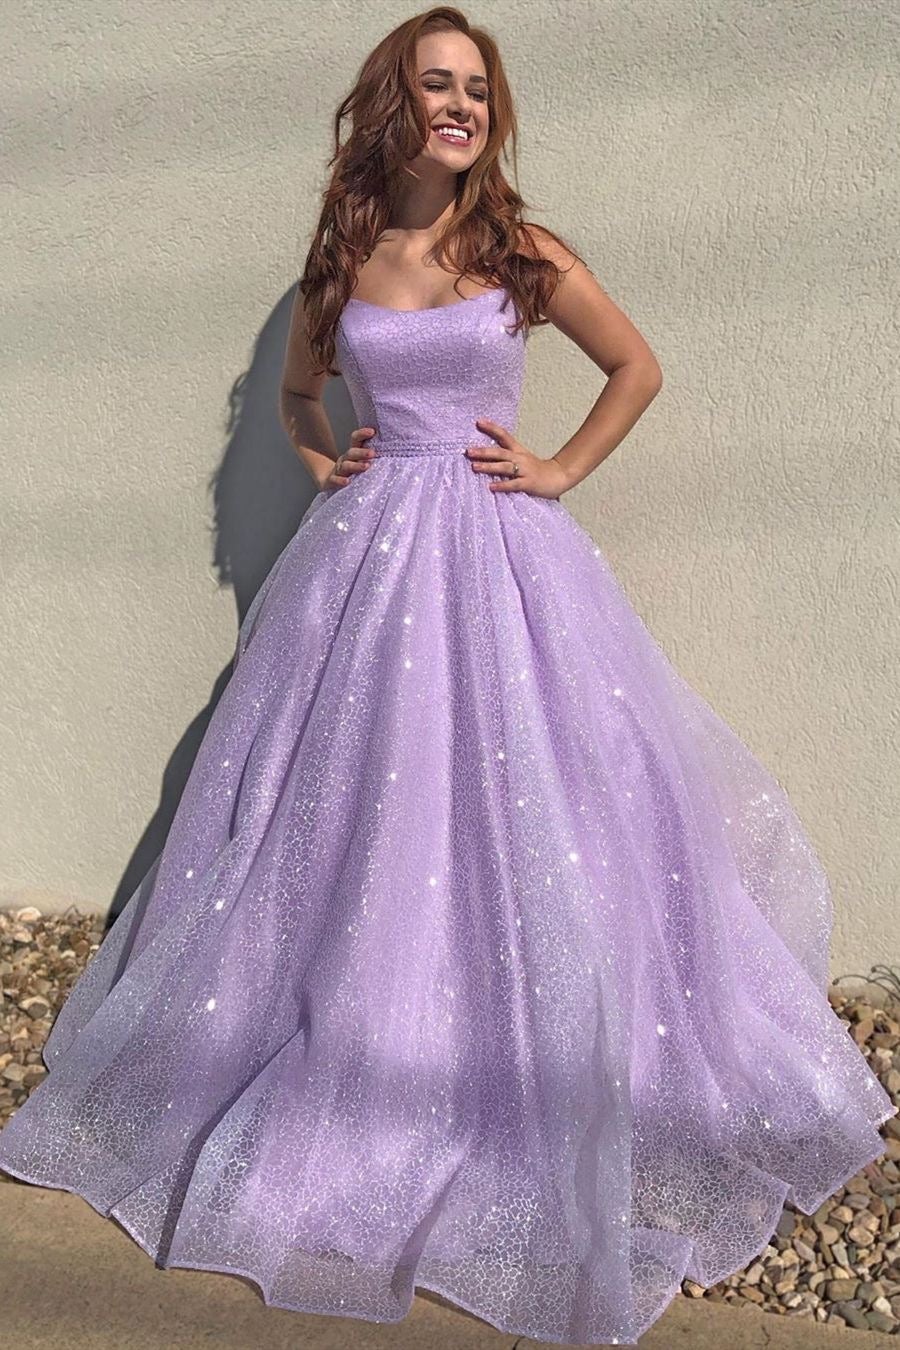 Sparkly Spaghetti Straps Lilac Long Prom Dresses With Sequins,Formal Dress